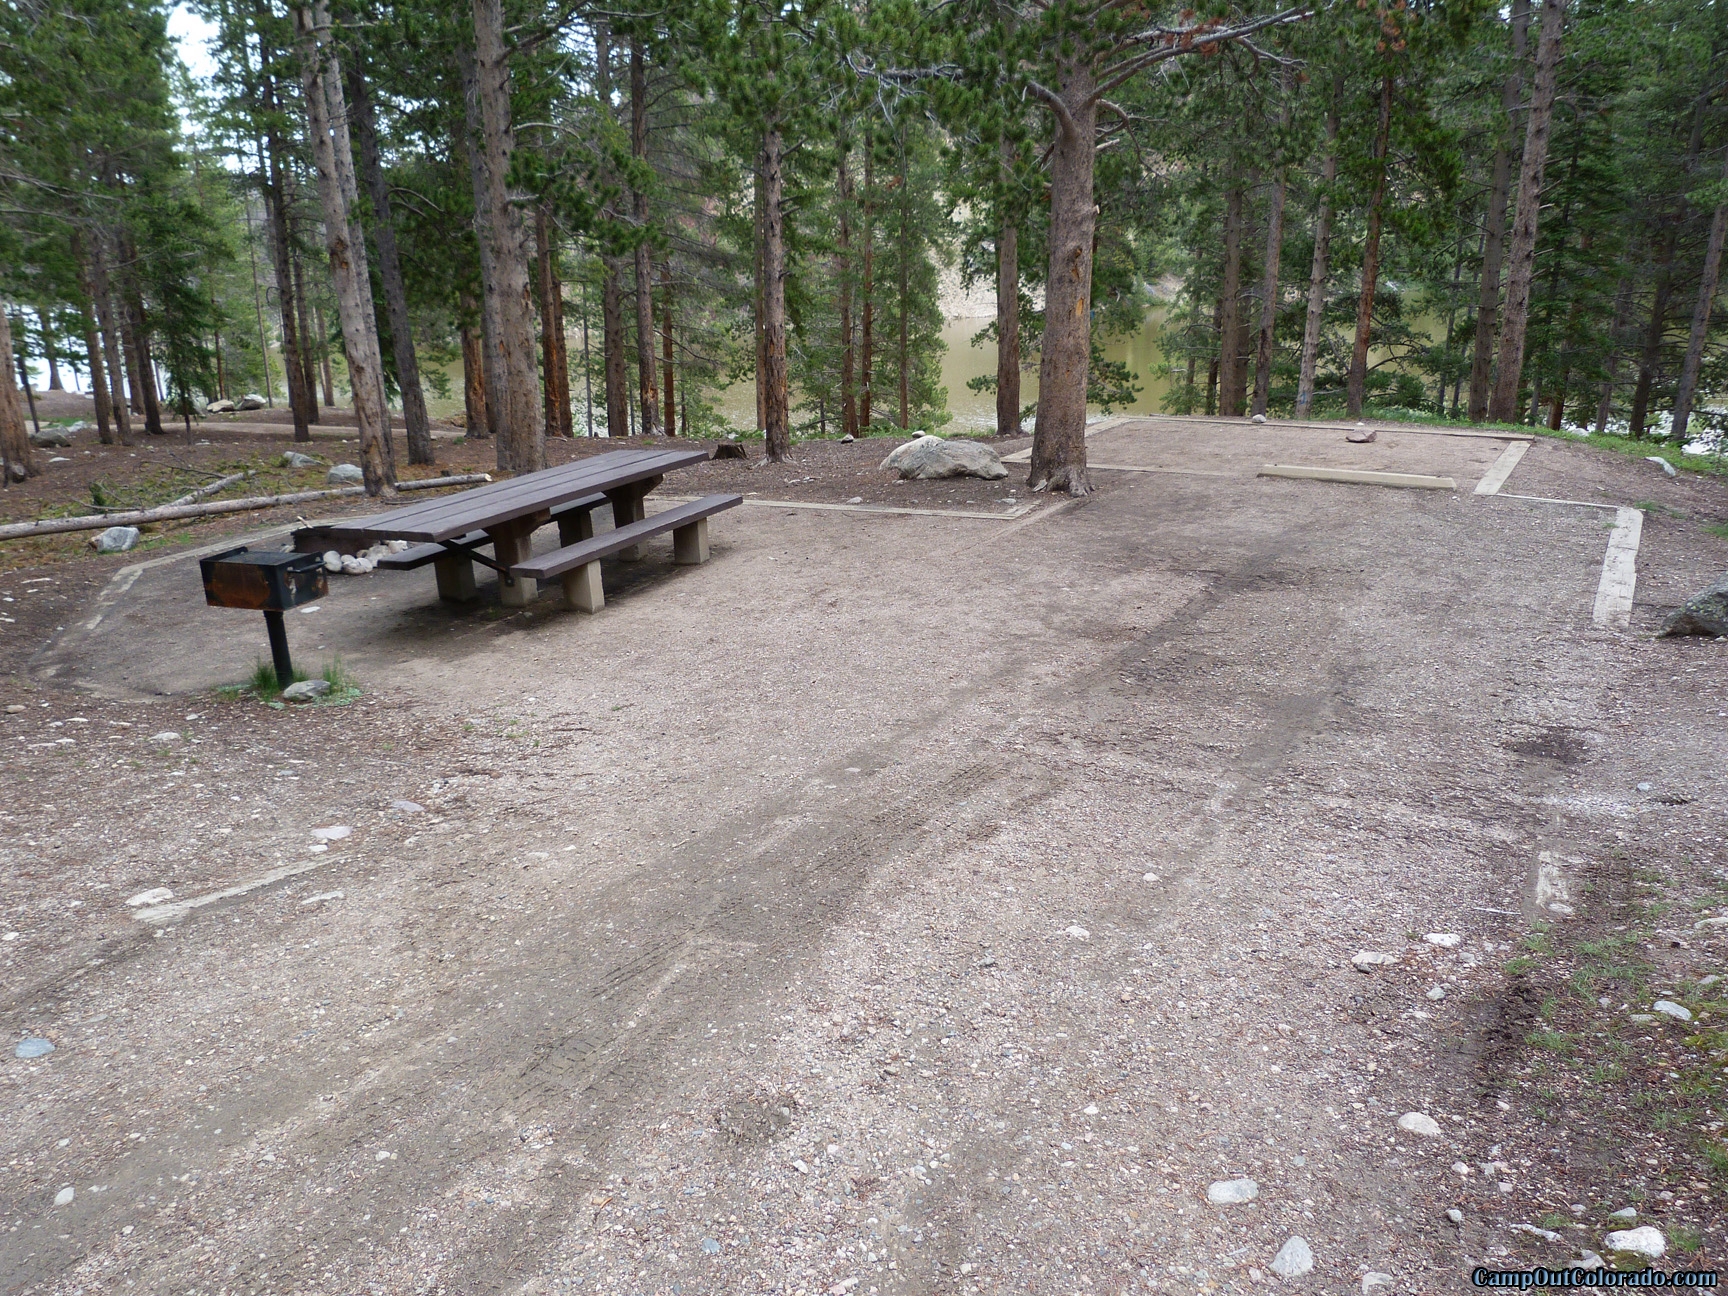 camp-out-colorado-chambers-lake-campground-well-groomed